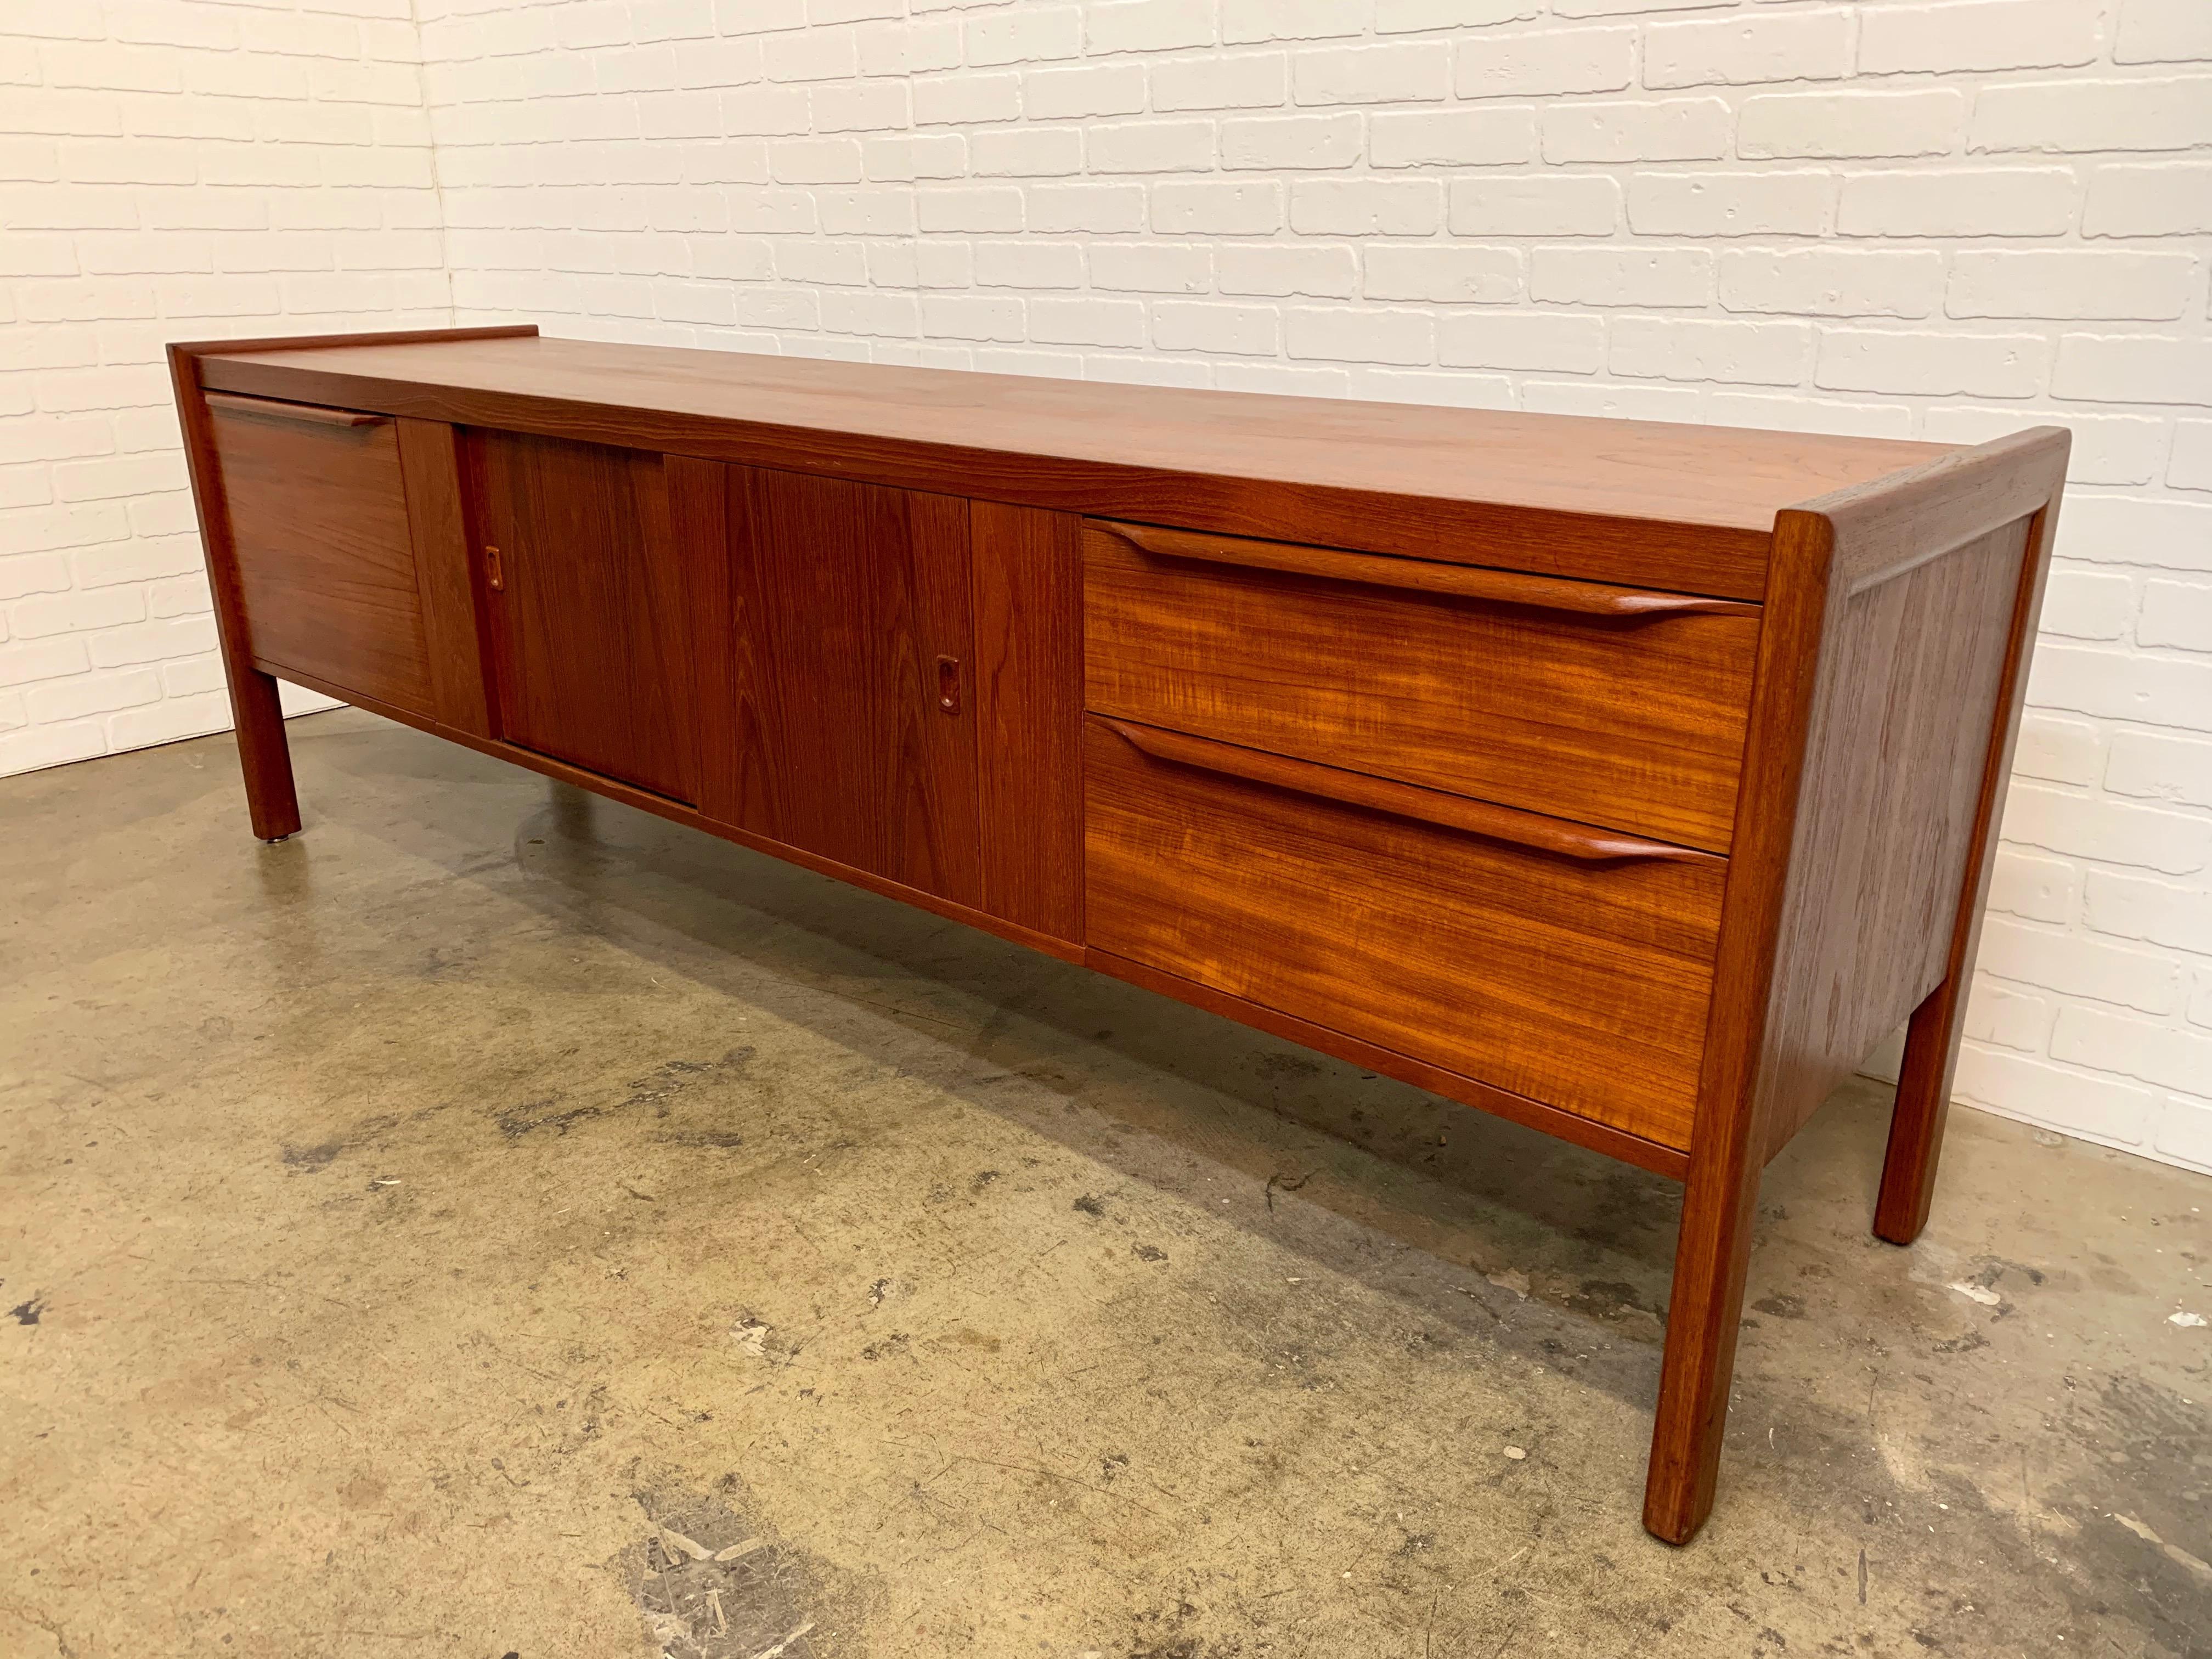 Long and low teak Danish modern credenza with sculpted drawer pulls and sliding door storage in the center.